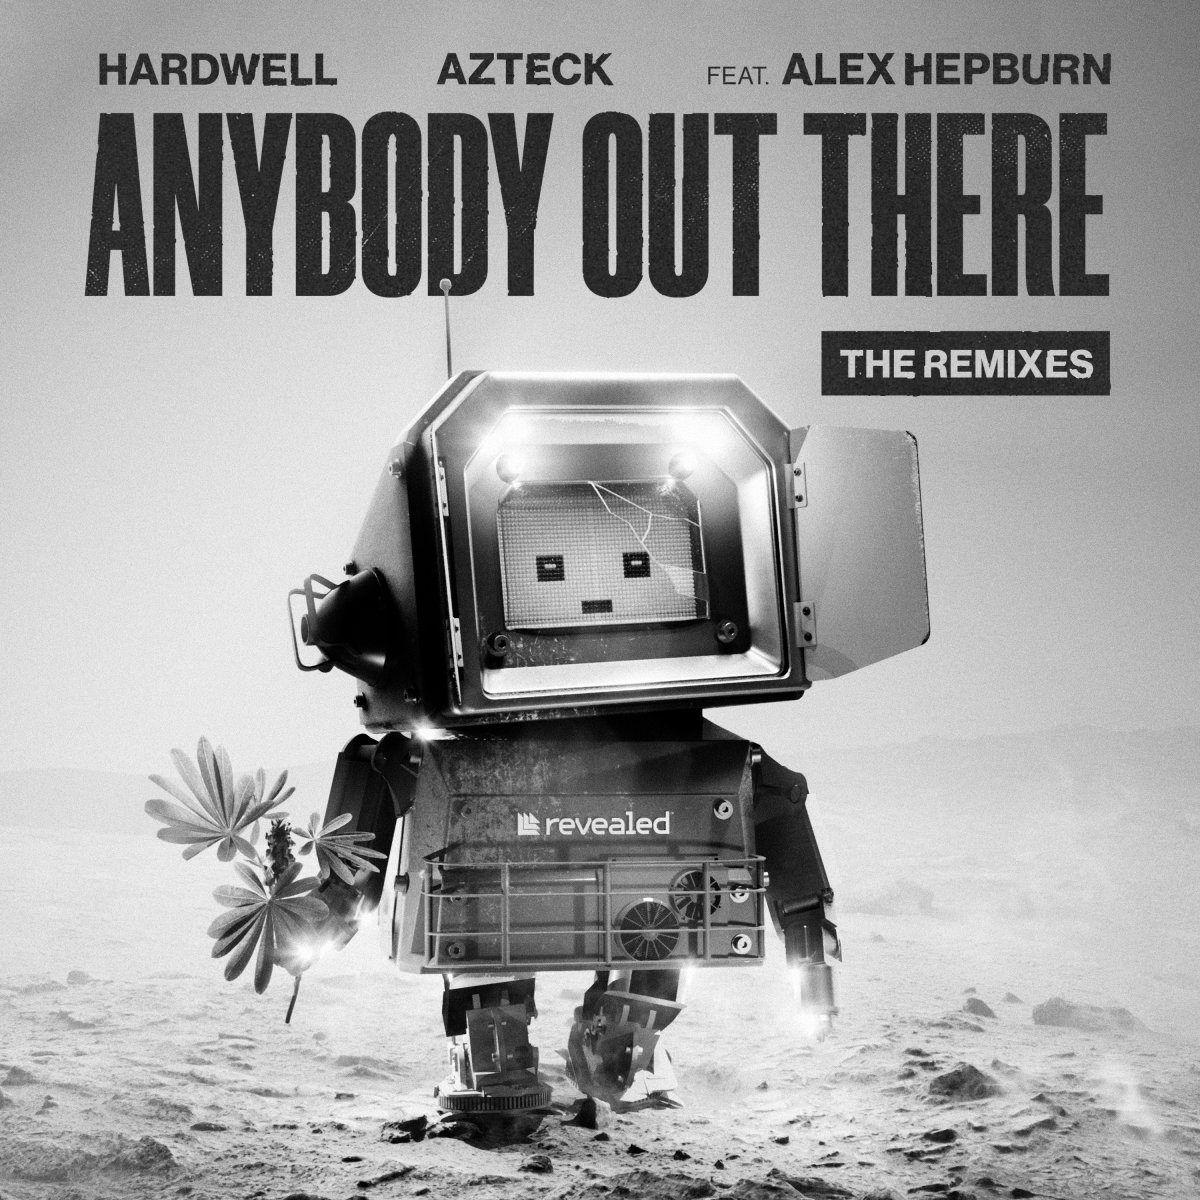 Anybody Out There (The Remixes) - Hardwell⁠ & Azteck⁠ feat. Alex Hepburn⁠, RSCL⁠, Keanu Silva ⁠, Dr Phunk⁠ , A*S*Y*S⁠, Radical Redemption⁠, FÄT TONY⁠ 